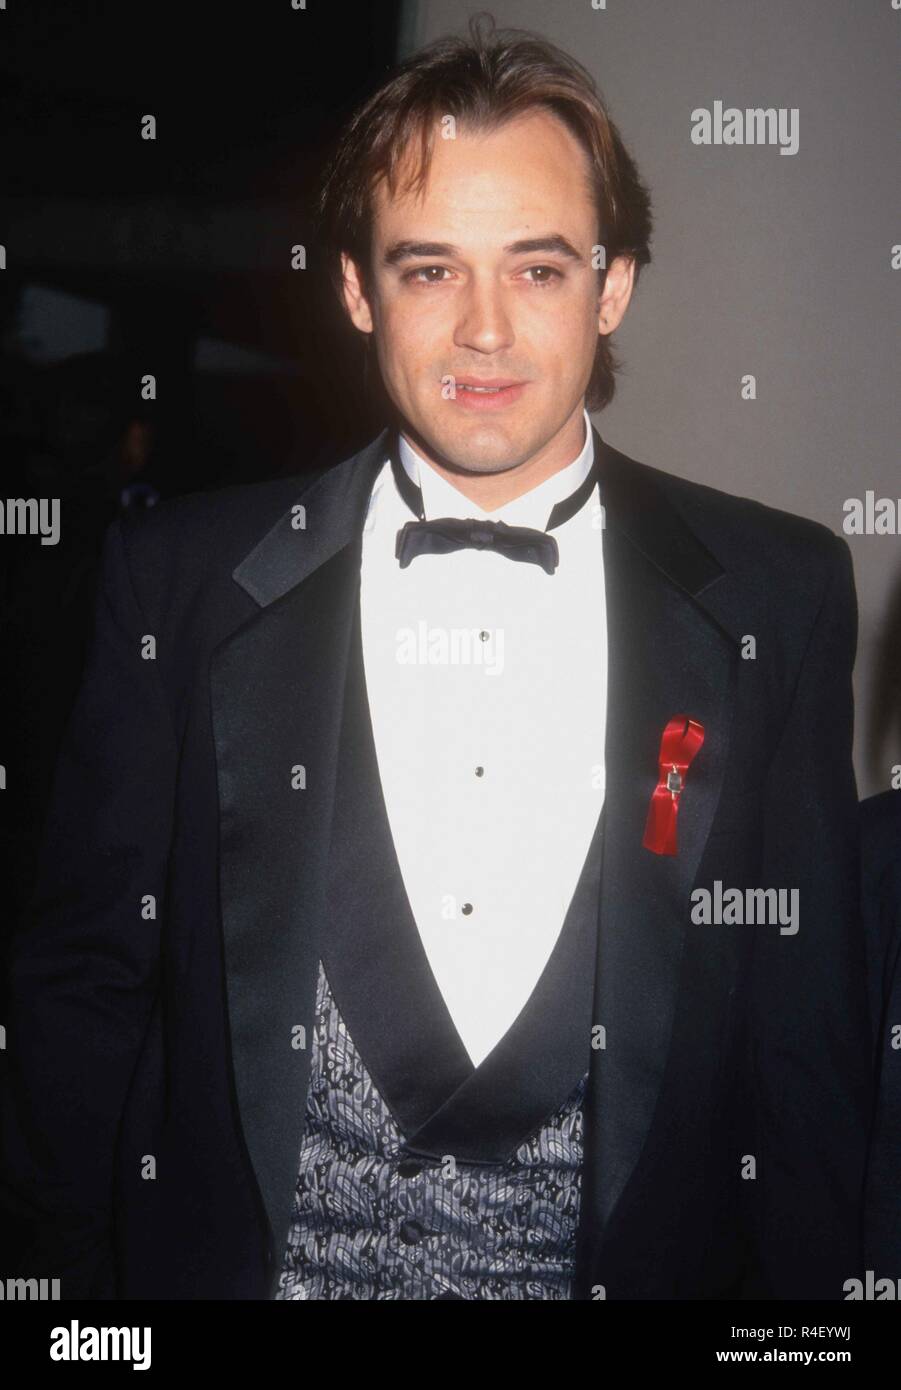 BEVERLY HILLS, CA - FEBRUARY 26: Actor Jon Lindstrom attends the Ninth Annual Soap Opera Digest Awards on February 26, 1993 at the Beverly Hilton Hotel in Beverly Hills, California. Photo by Barry King/Alamy Stock Photo Stock Photo